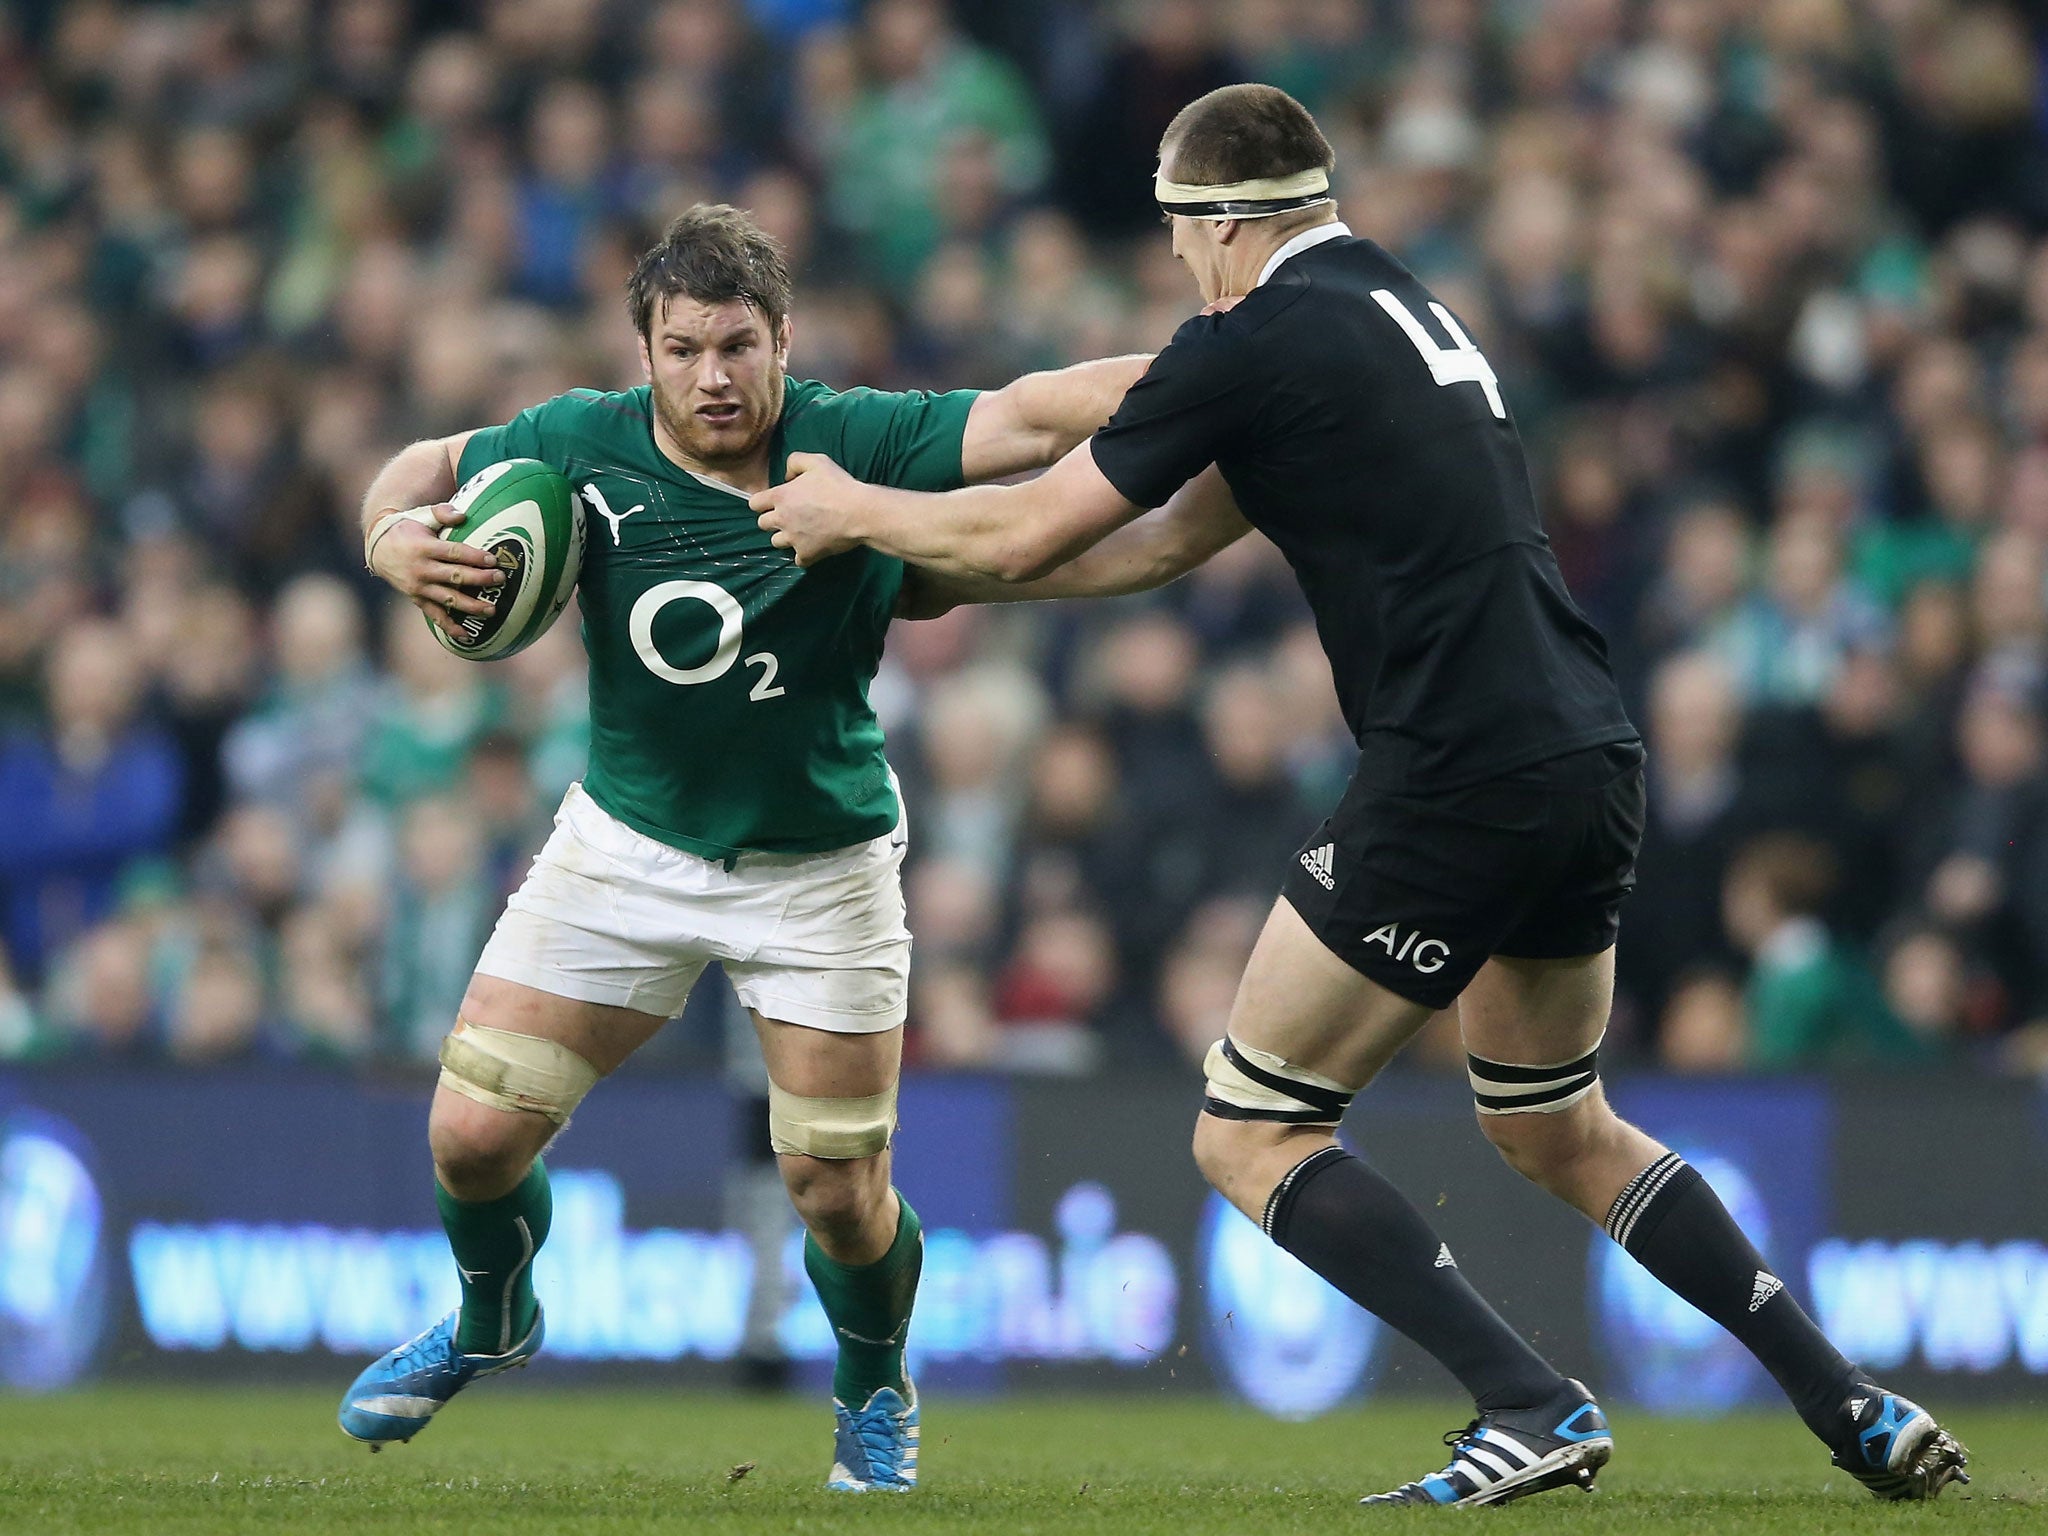 Sean O'Brien's absence will be felt by Ireland in their clash with Wales, admits head coach Joe Schmidt